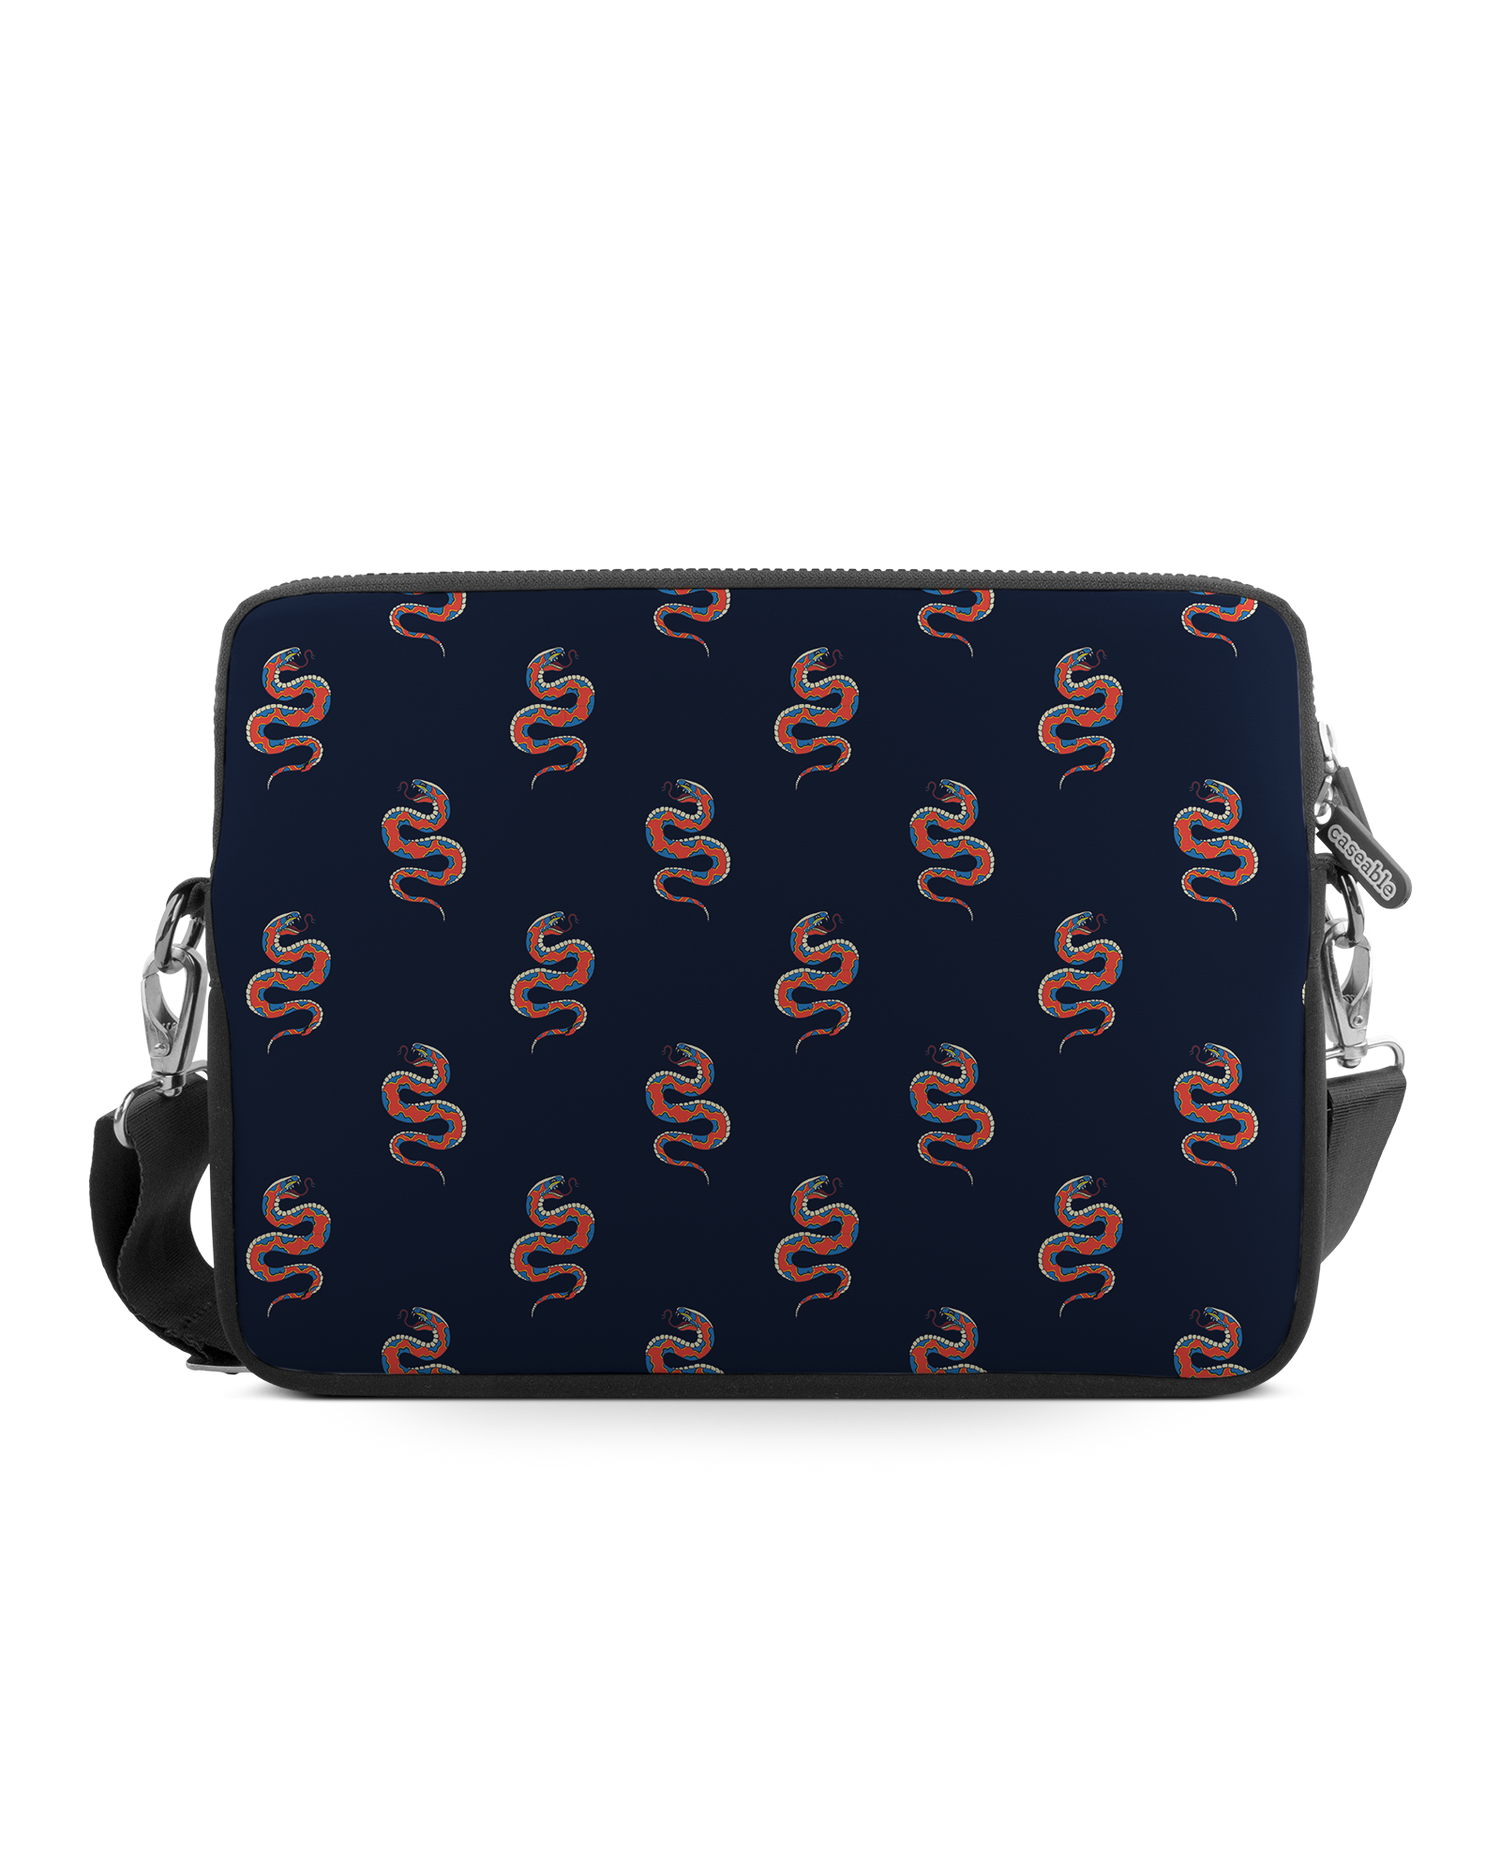 Repeating Snakes Premium Laptop Bag 17 inch: Front View